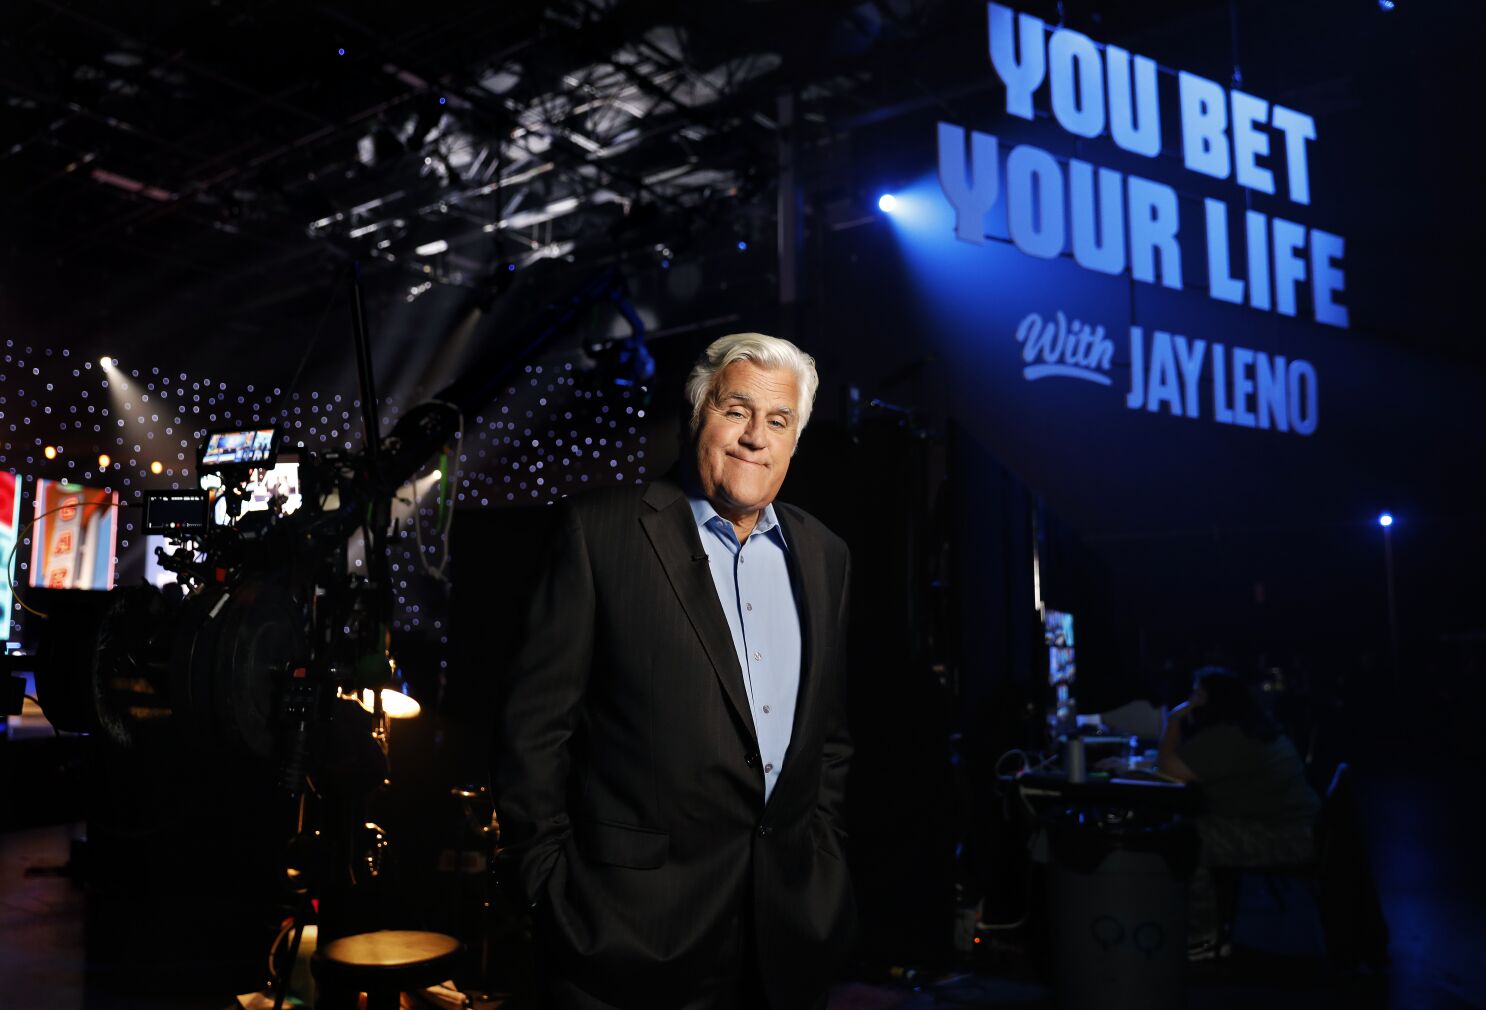 You Bet Your Life With Jay Leno Season 2 Episode 55 Release Date